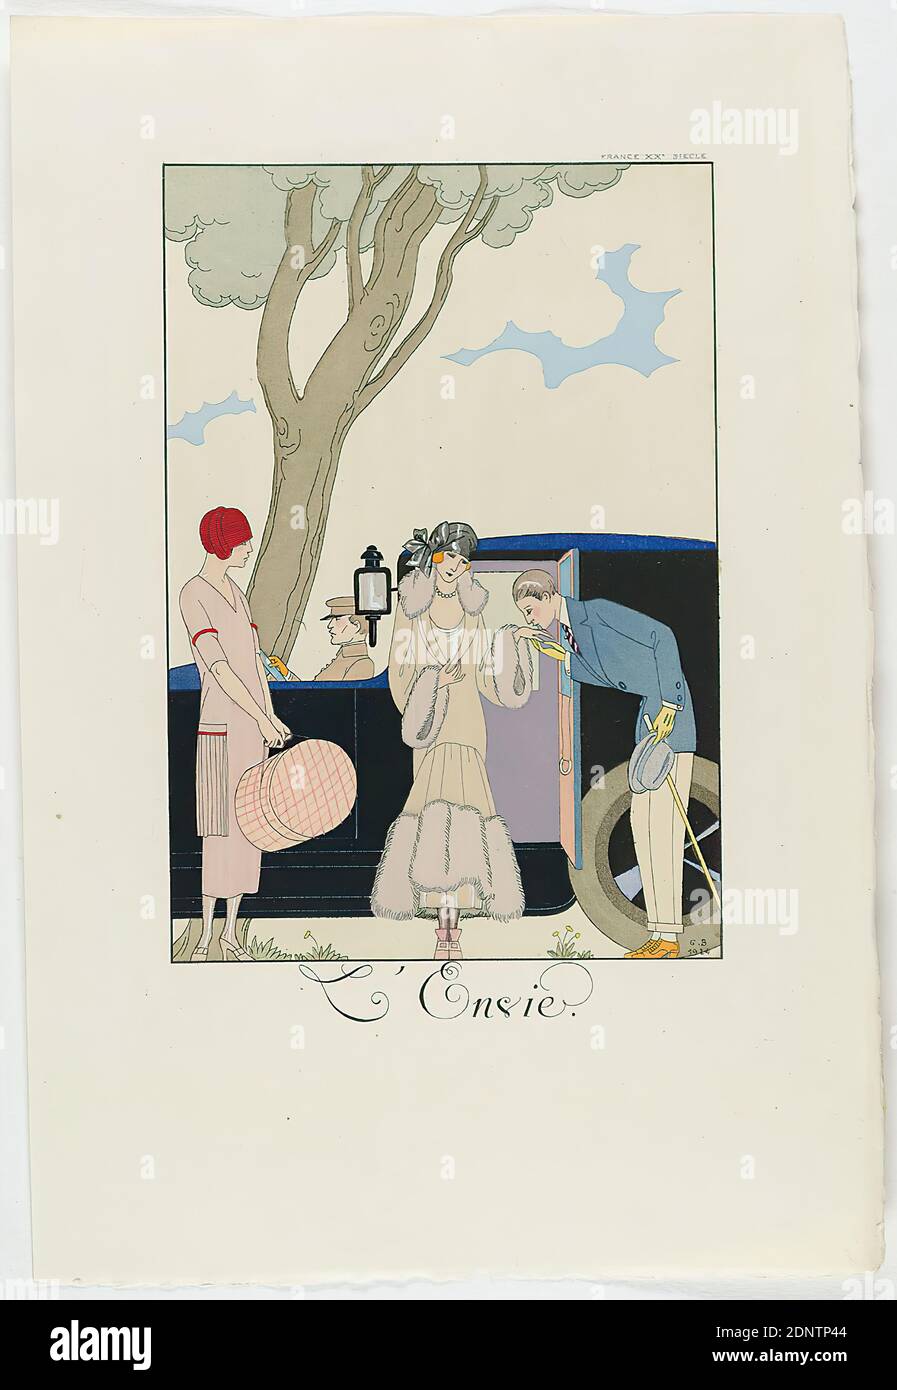 George Barbier, Meynial éditeur, Paris, L'Envie, from the fashion almanac Falbalas et Fanfreluches 1925, handmade paper, opaque watercolor, etching, stencil printing (pochoir), pochoir and etching, sheet size: height: 25 cm; width: 16.8 cm, monogrammed, inscribed and dated: in the printing plate: G. B, 1924, L'Envie, inscribed: in the printing plate: FRANCE XXe SIECLE, graphics, automobile, automobile, relationships between the sexes, woman, Art Déco right handwritten in lead: Mrs. Stock Photo